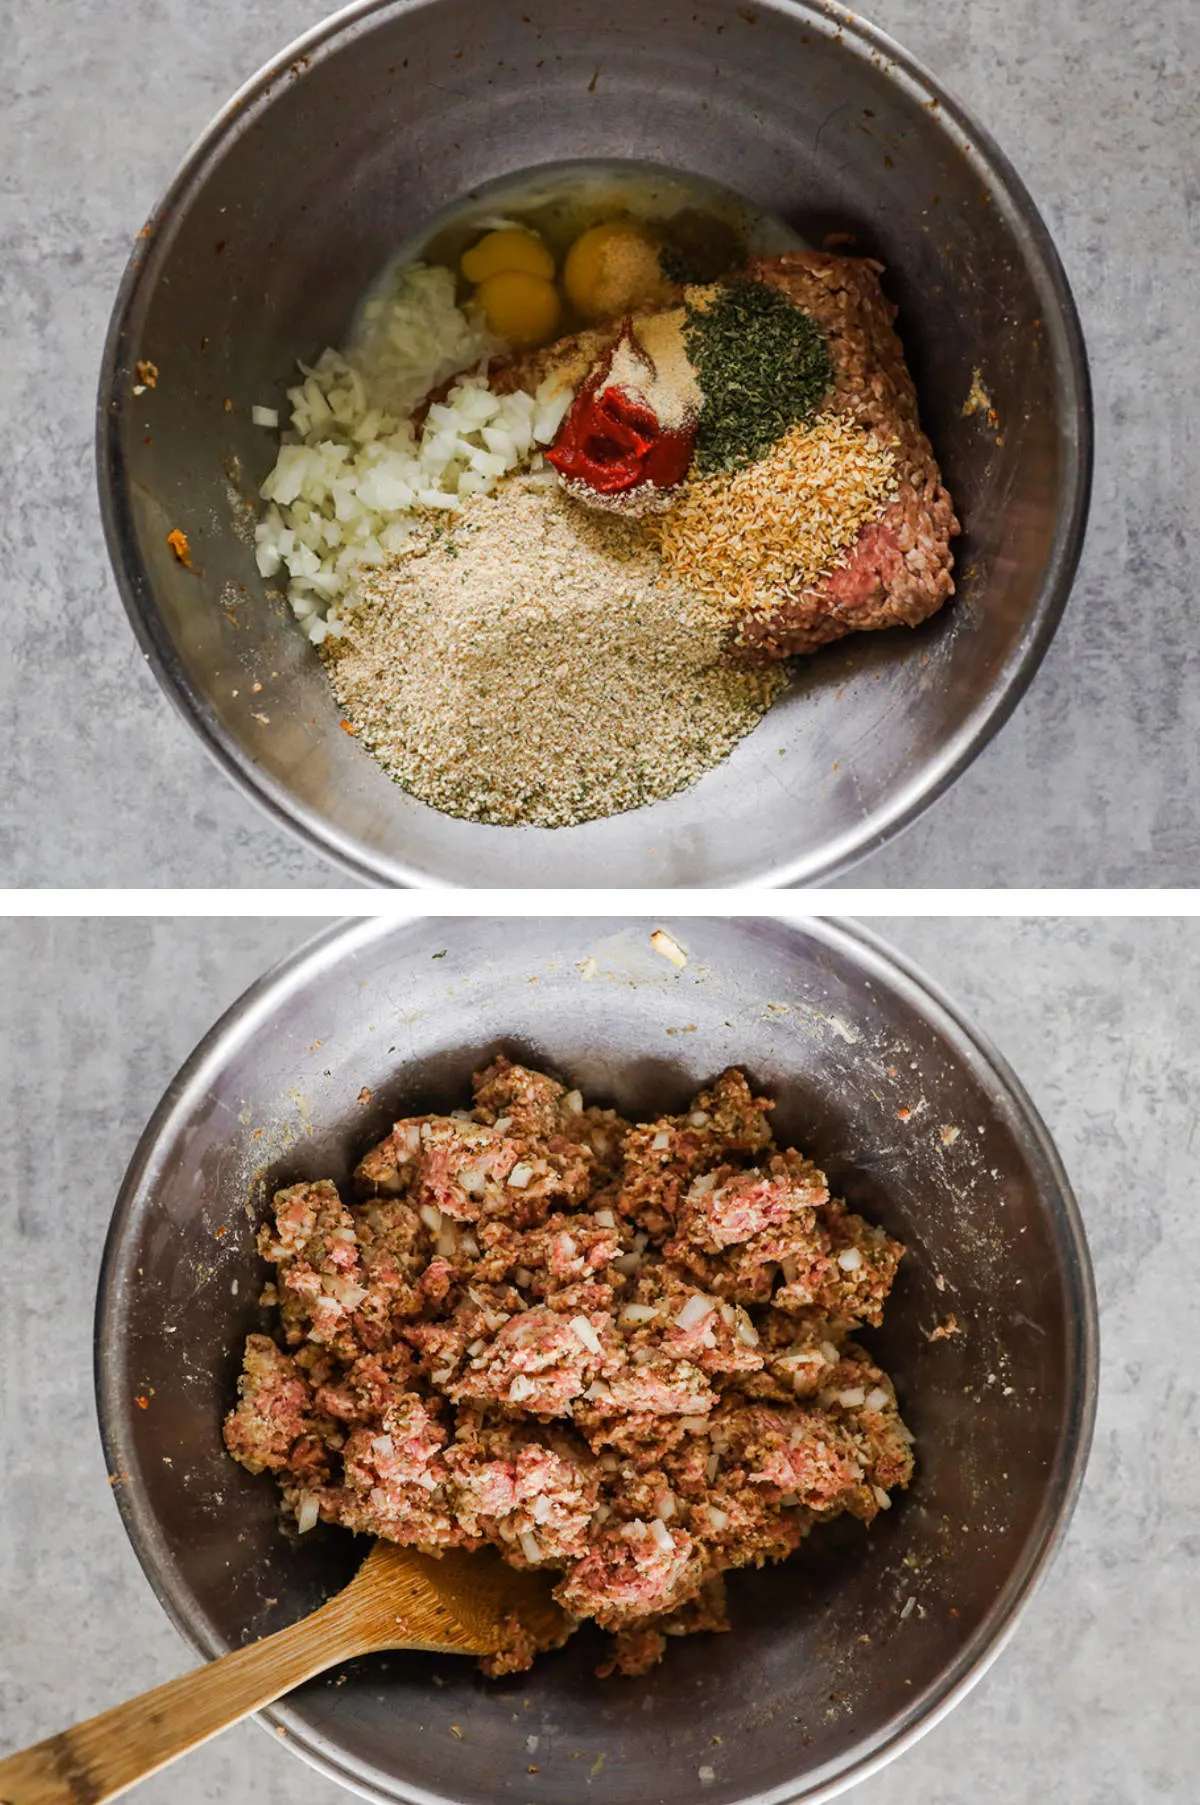 Two overhead images in one: 1. Ground beef, onion, bread crumbs, milk, eggs, tomato paste, garlic powder, onion powder and dried parsley are added to a steel bowl. 2. Ingredients are mixed with wooden spoon. 